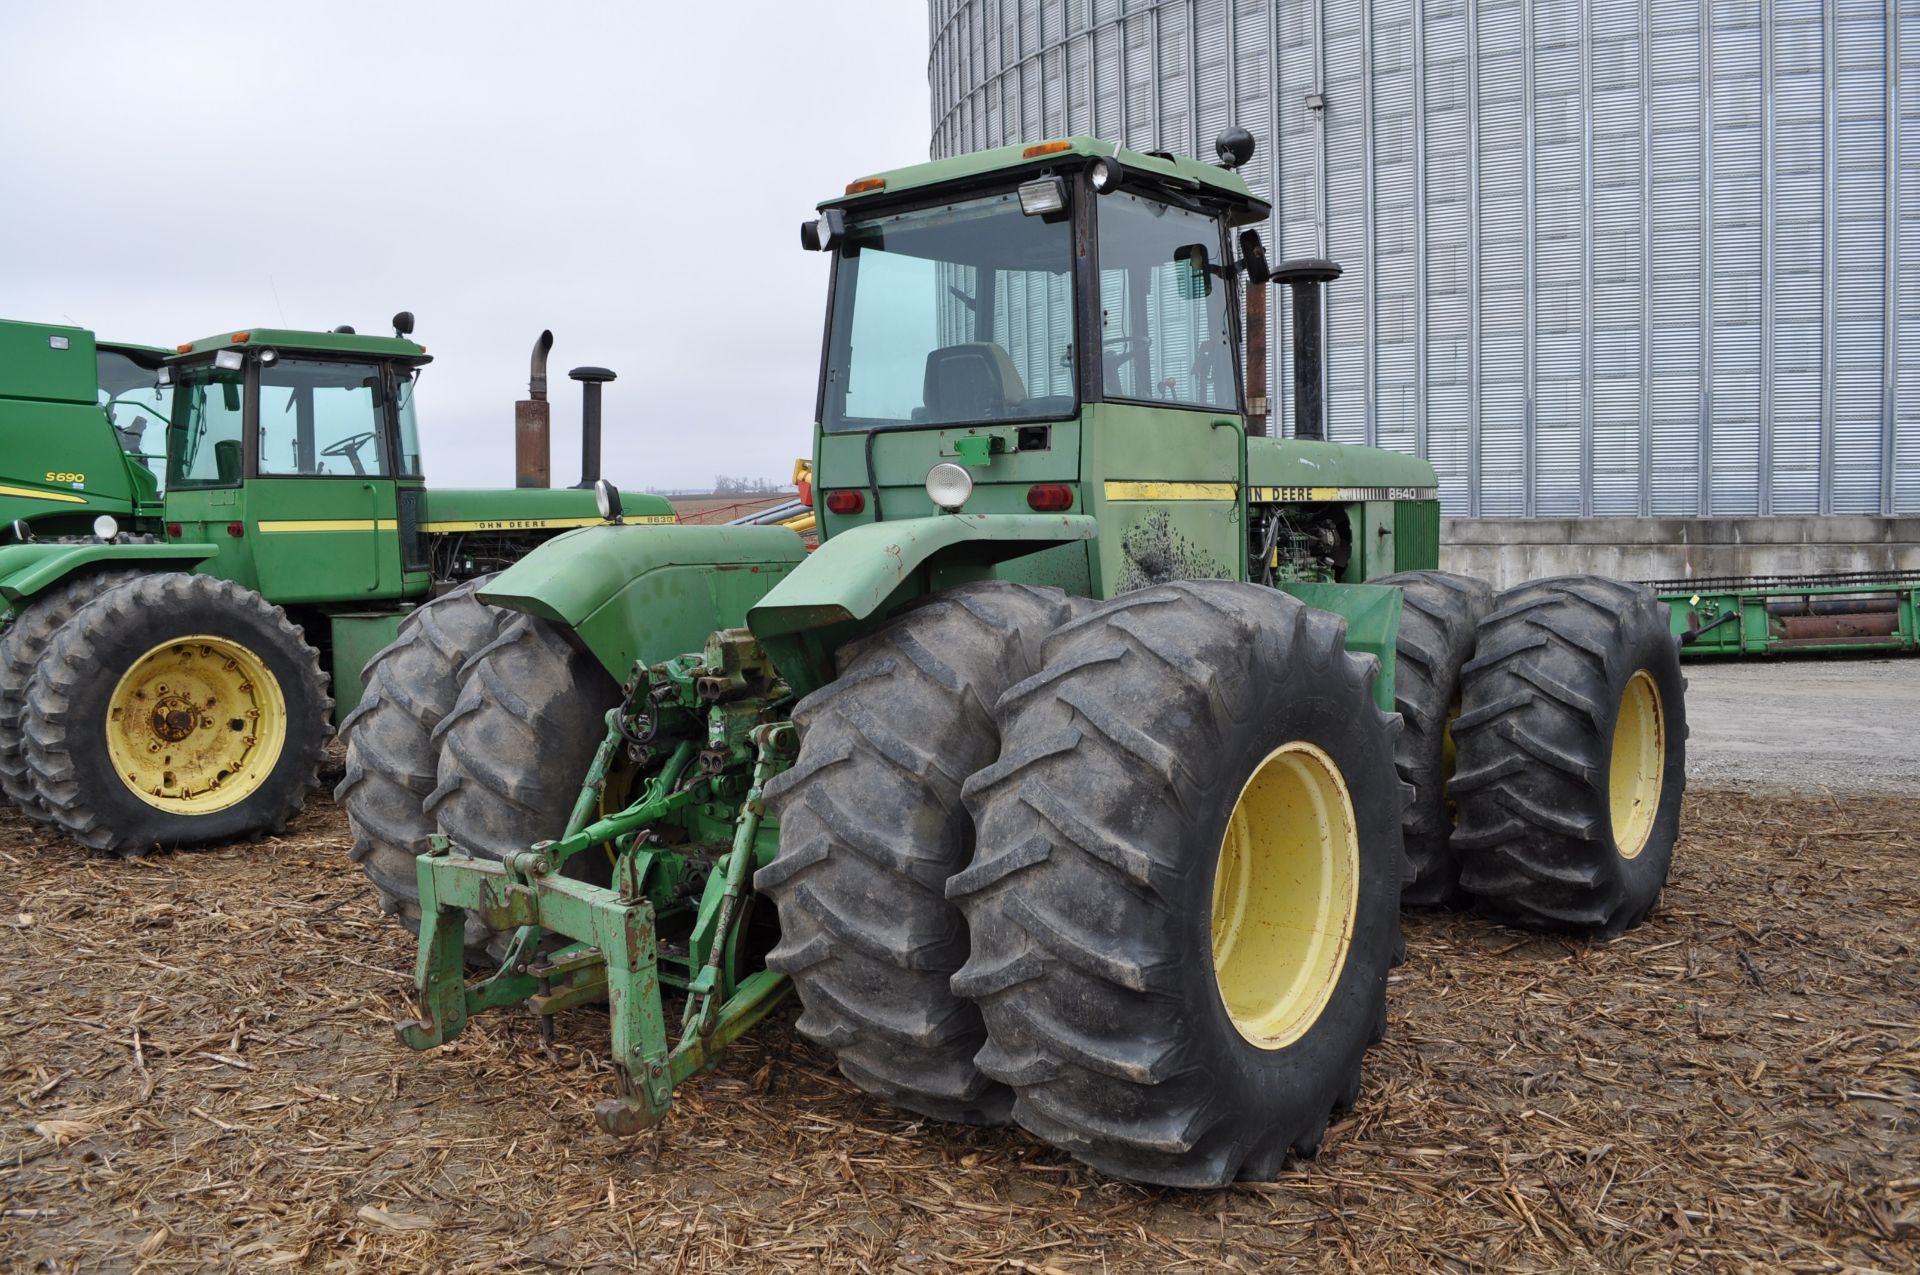 John Deere 8630 4WD tractor, 23.1-30 duals, 3 hyd remotes, 3 pt, quick hitch, 1000 PTO - Image 3 of 30